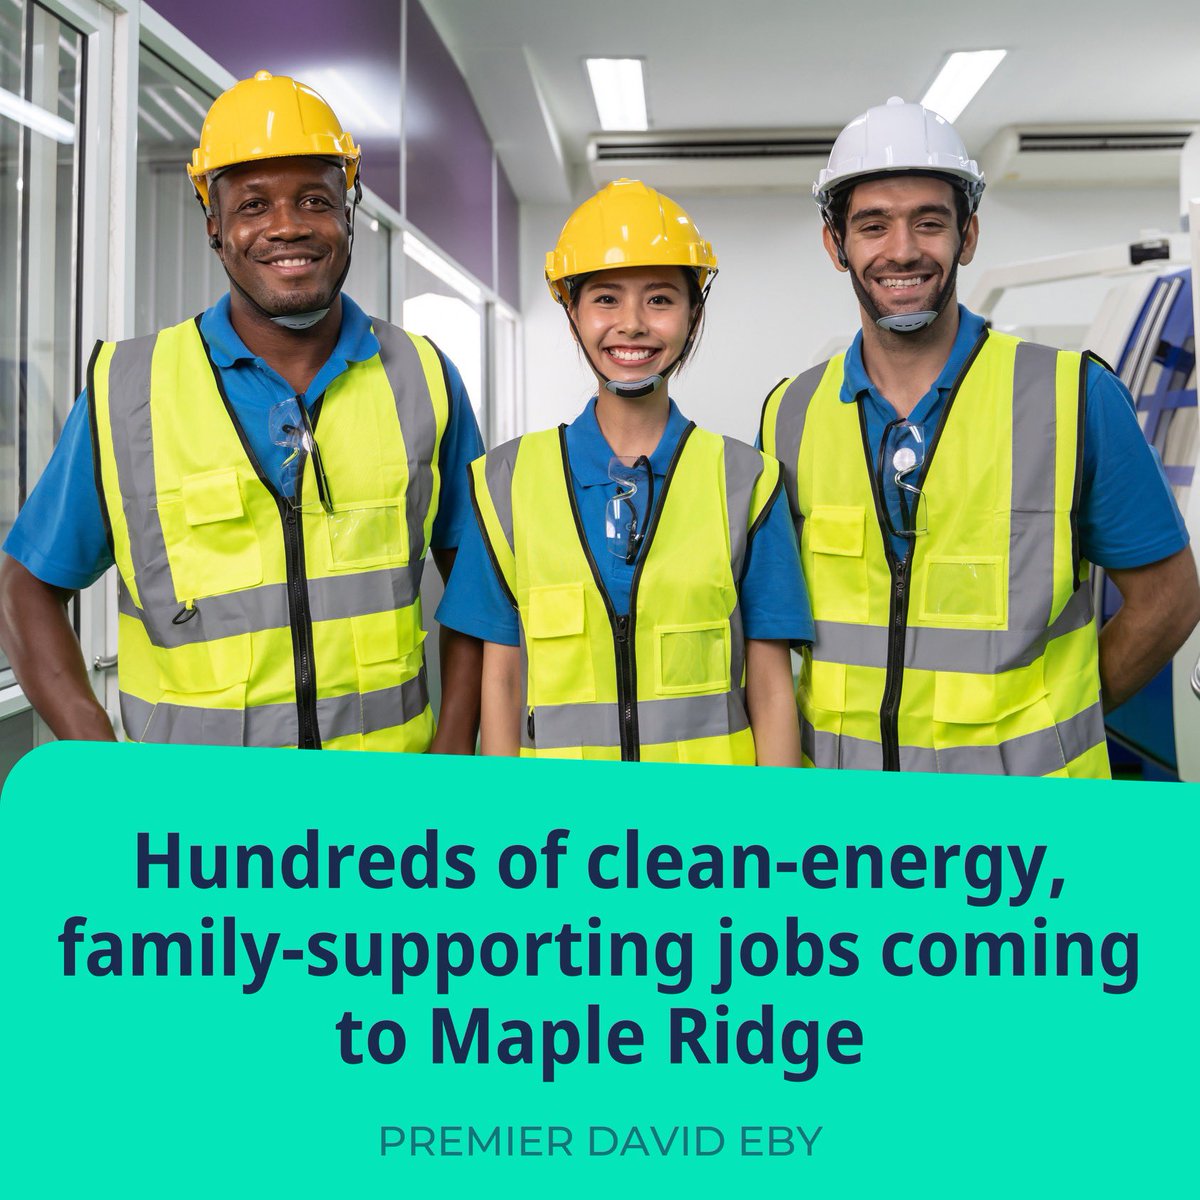 Very excited to announce we are partnering with the federal government and E-One Moli Energy to create good-paying, clean energy jobs that support 450 families. The Maple Ridge business will build an advanced battery factory that capitalizes on BC’s leadership in clean energy.